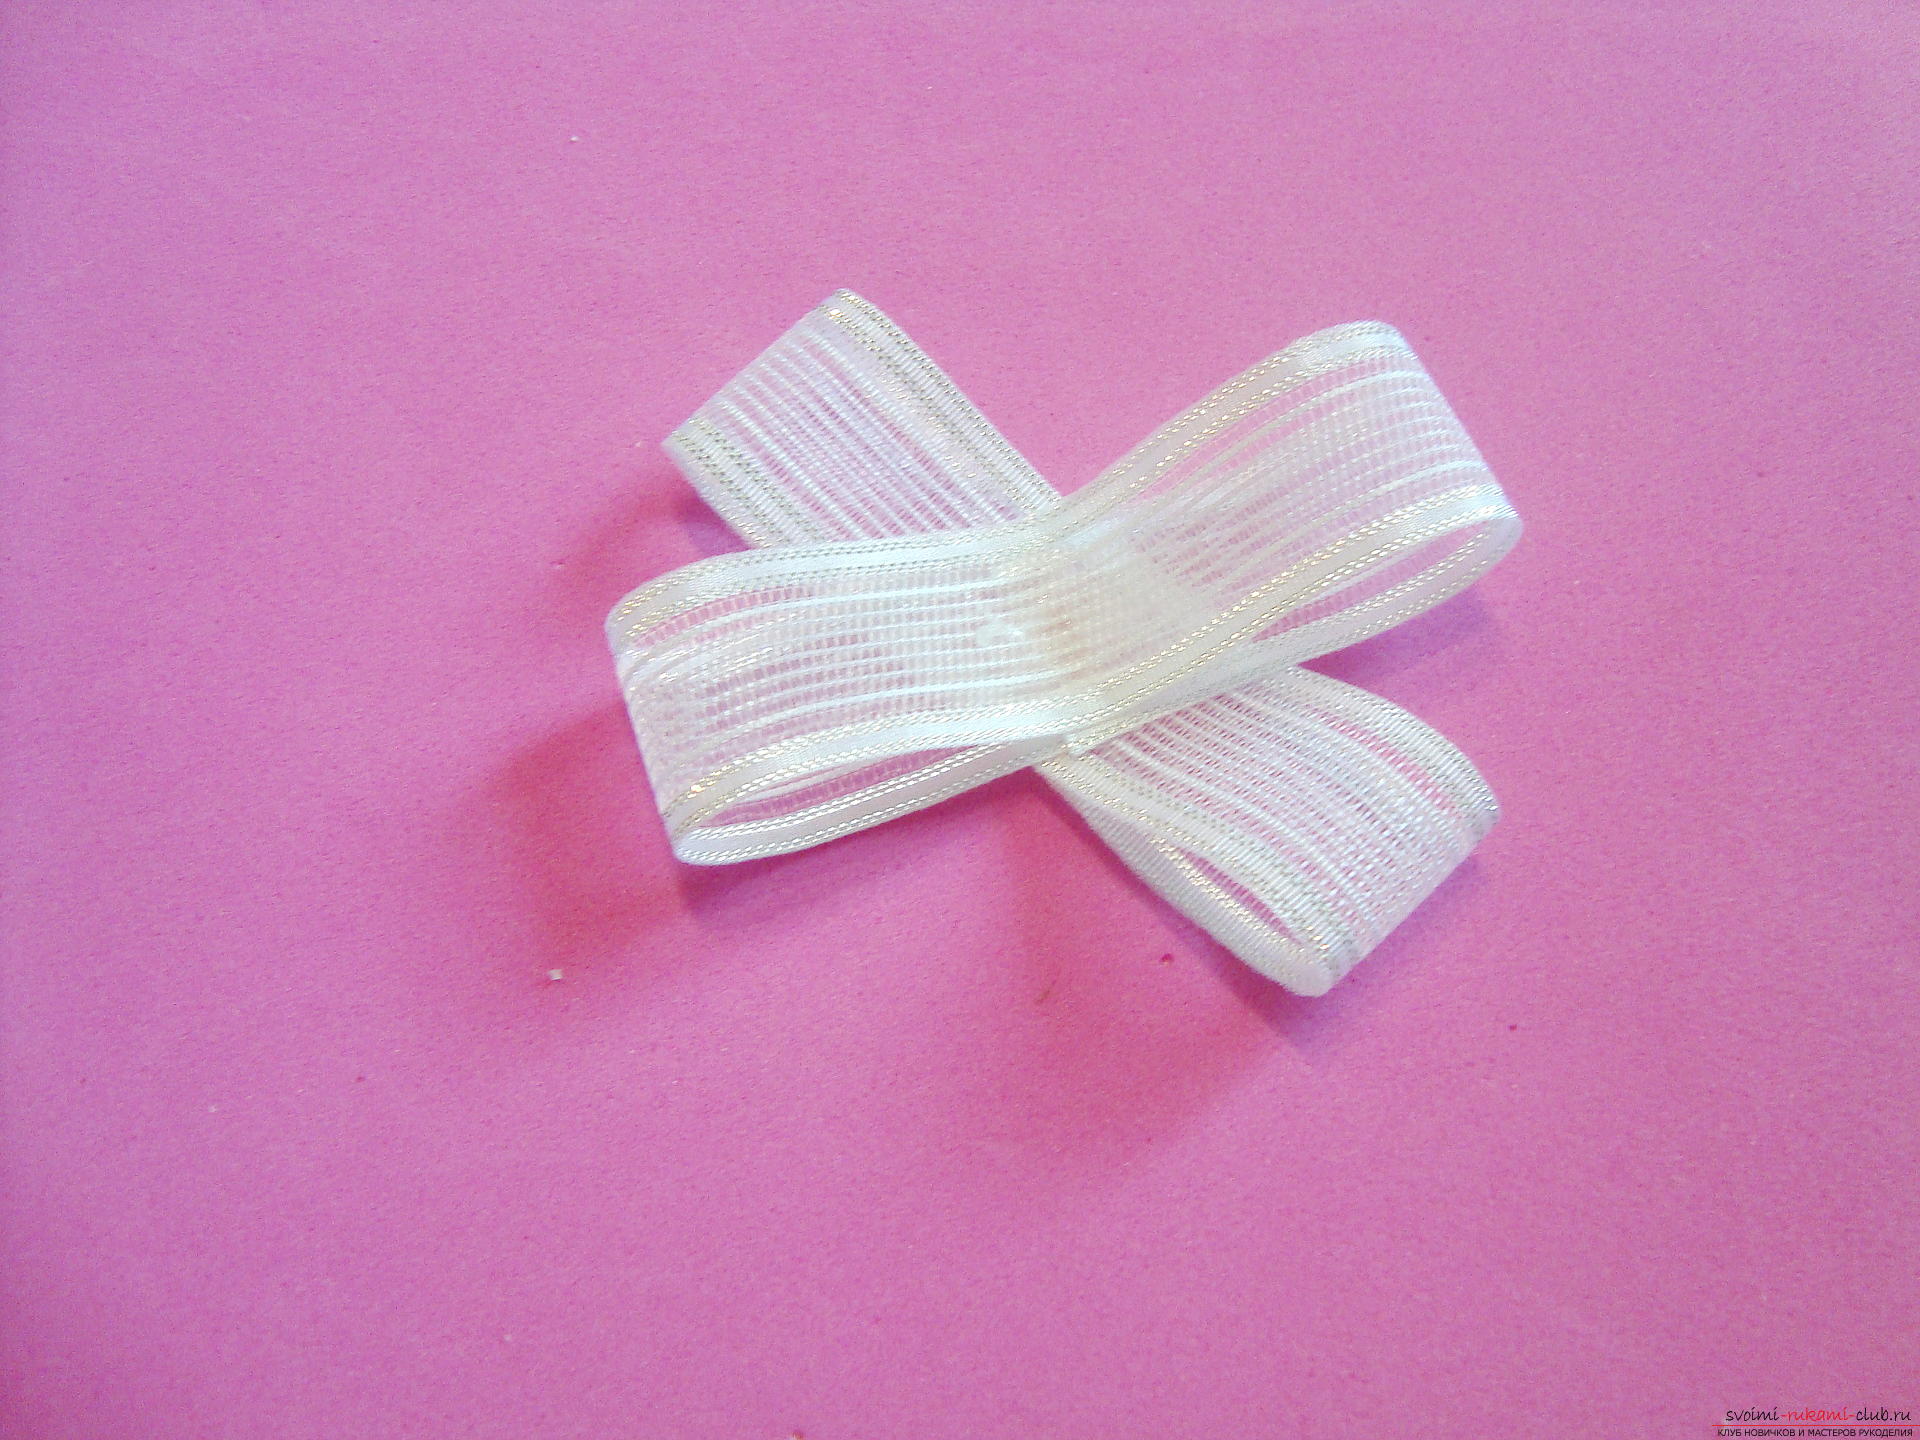 Step-by-step guide to making bows by September 1 for schoolgirls describing the steps and photos. Photo №13